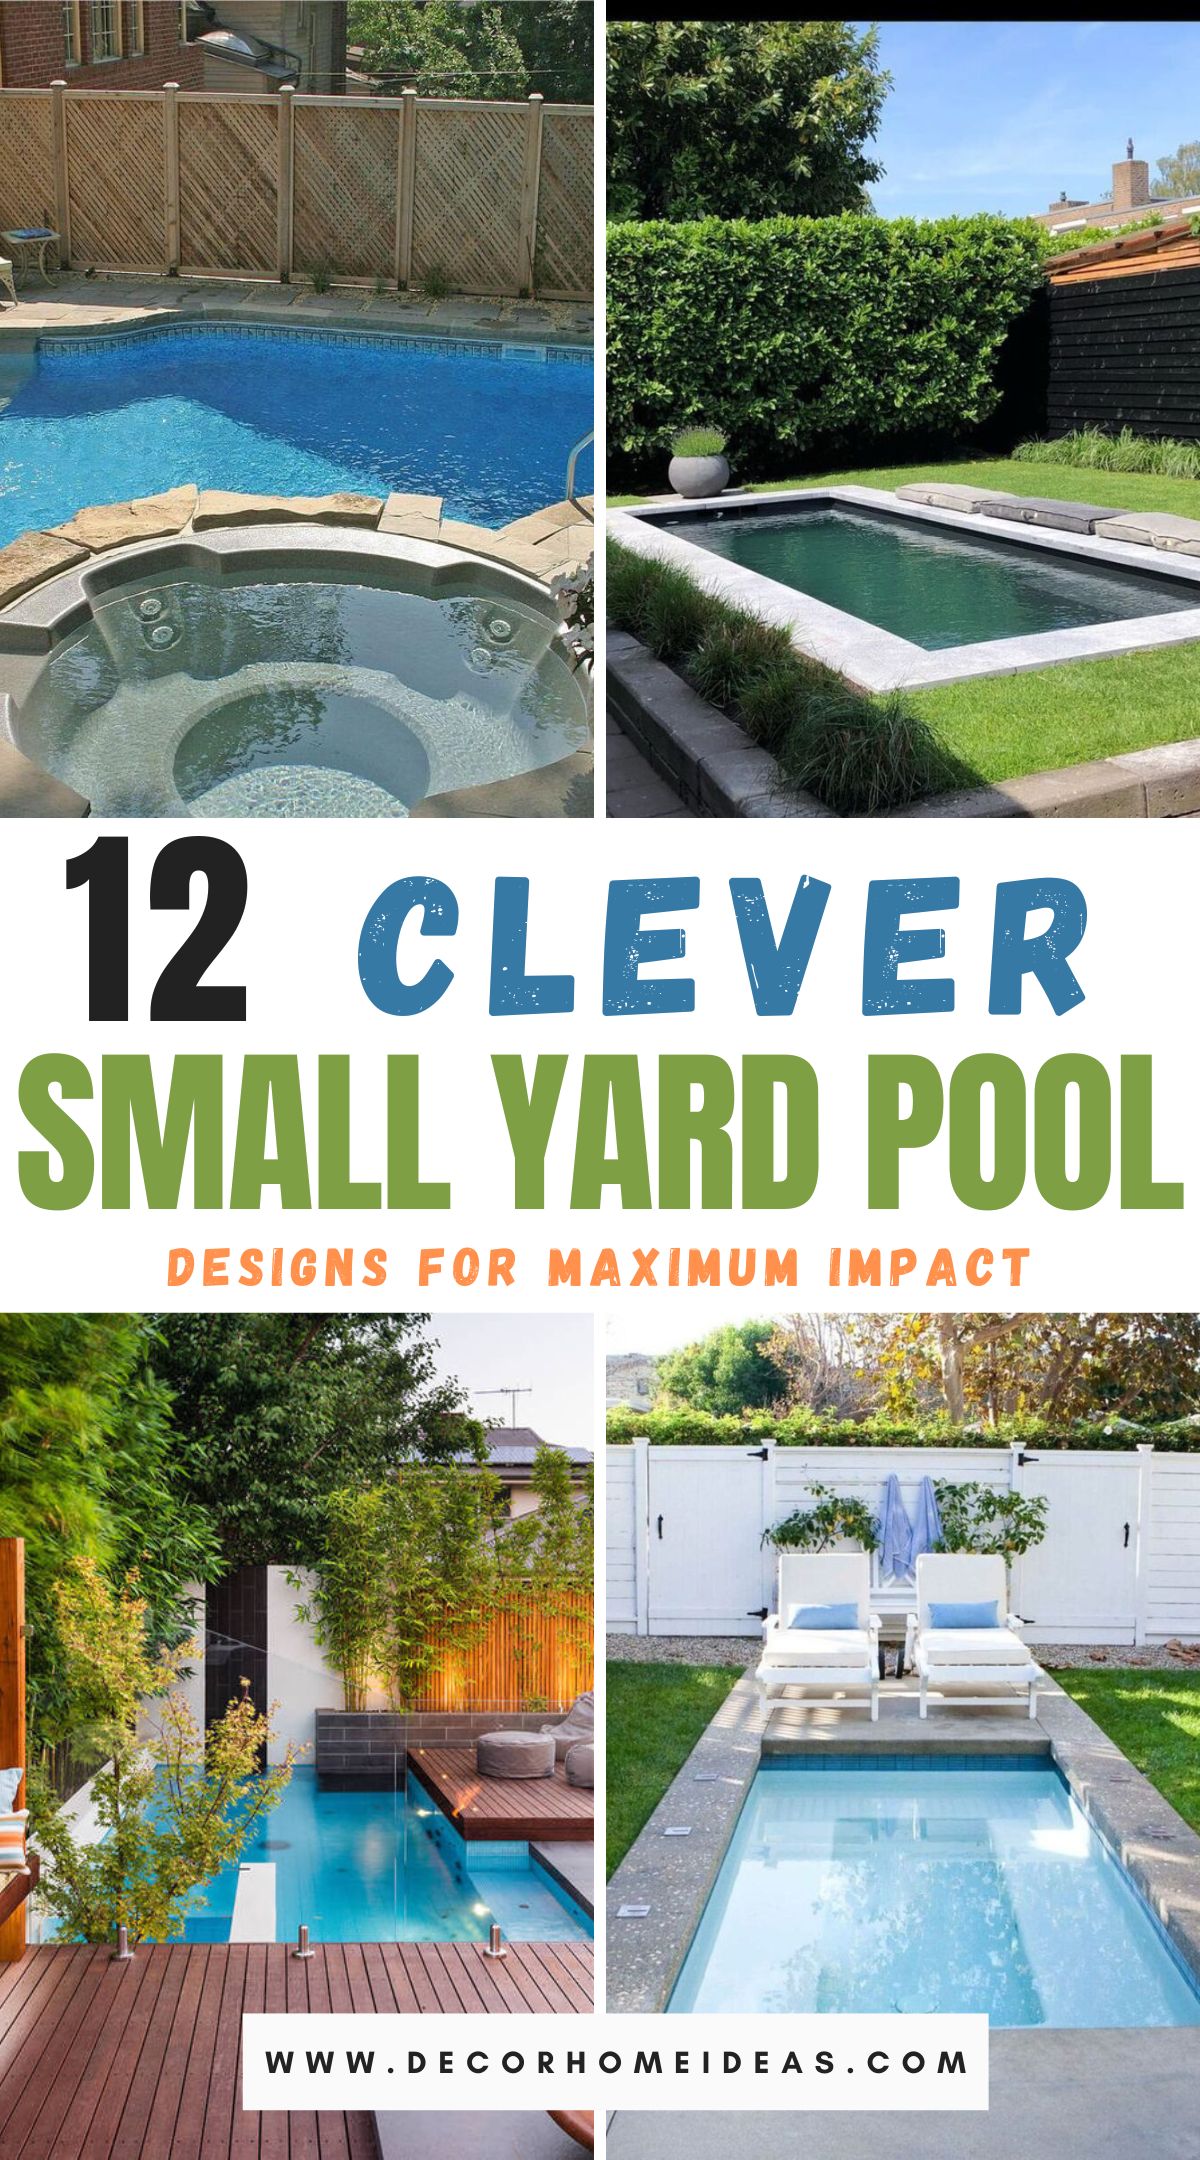 Maximize your small yard space with these 12 ingenious pool designs. From compact lap pools to stylish plunge pools, discover innovative ideas that bring relaxation and luxury to even the most petite outdoor spaces, creating a refreshing oasis right at home.